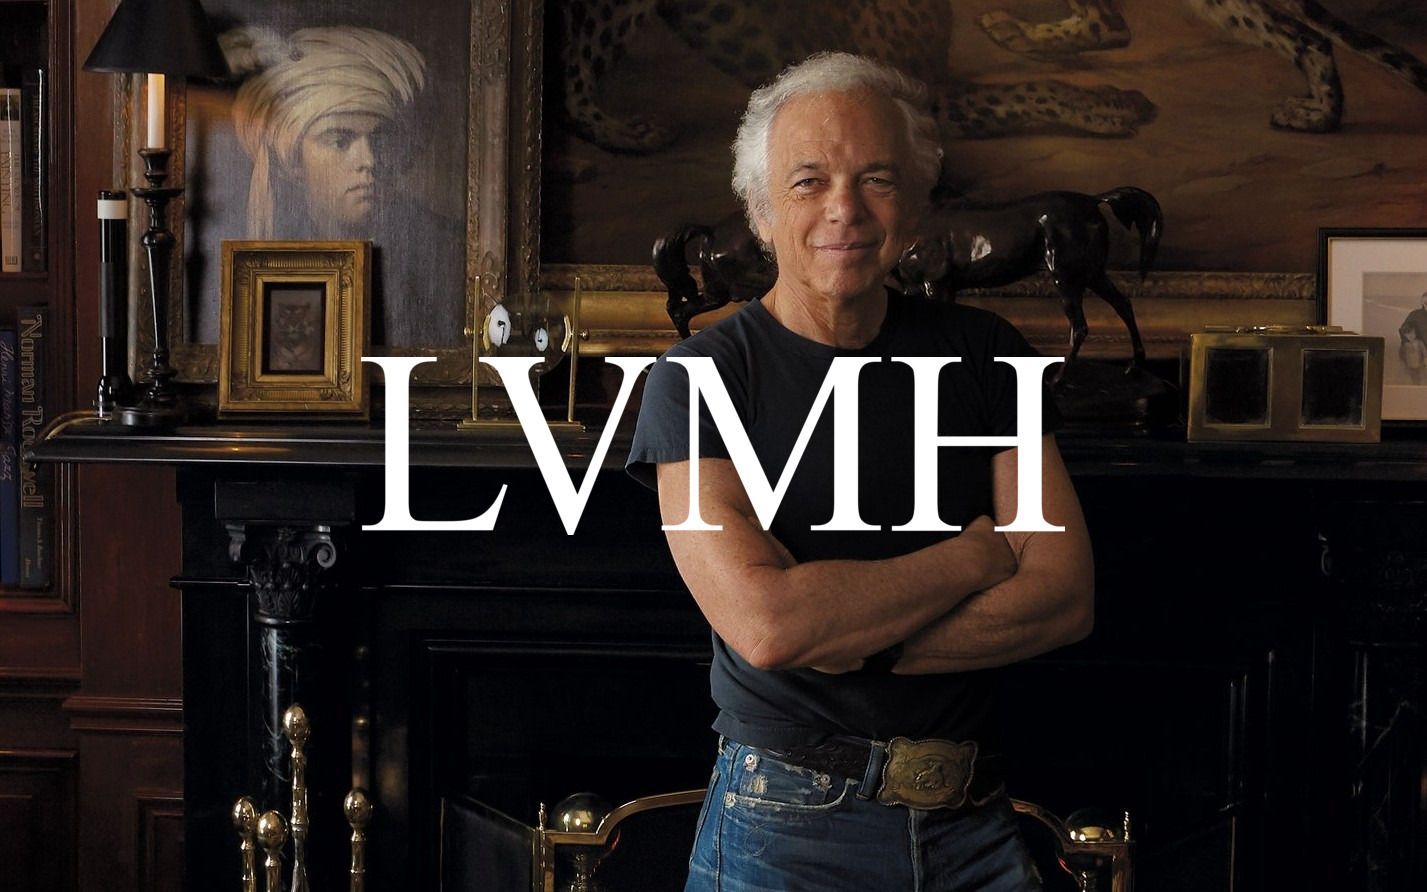 Is the acquisition of Ralph Lauren by LVMH a good idea?